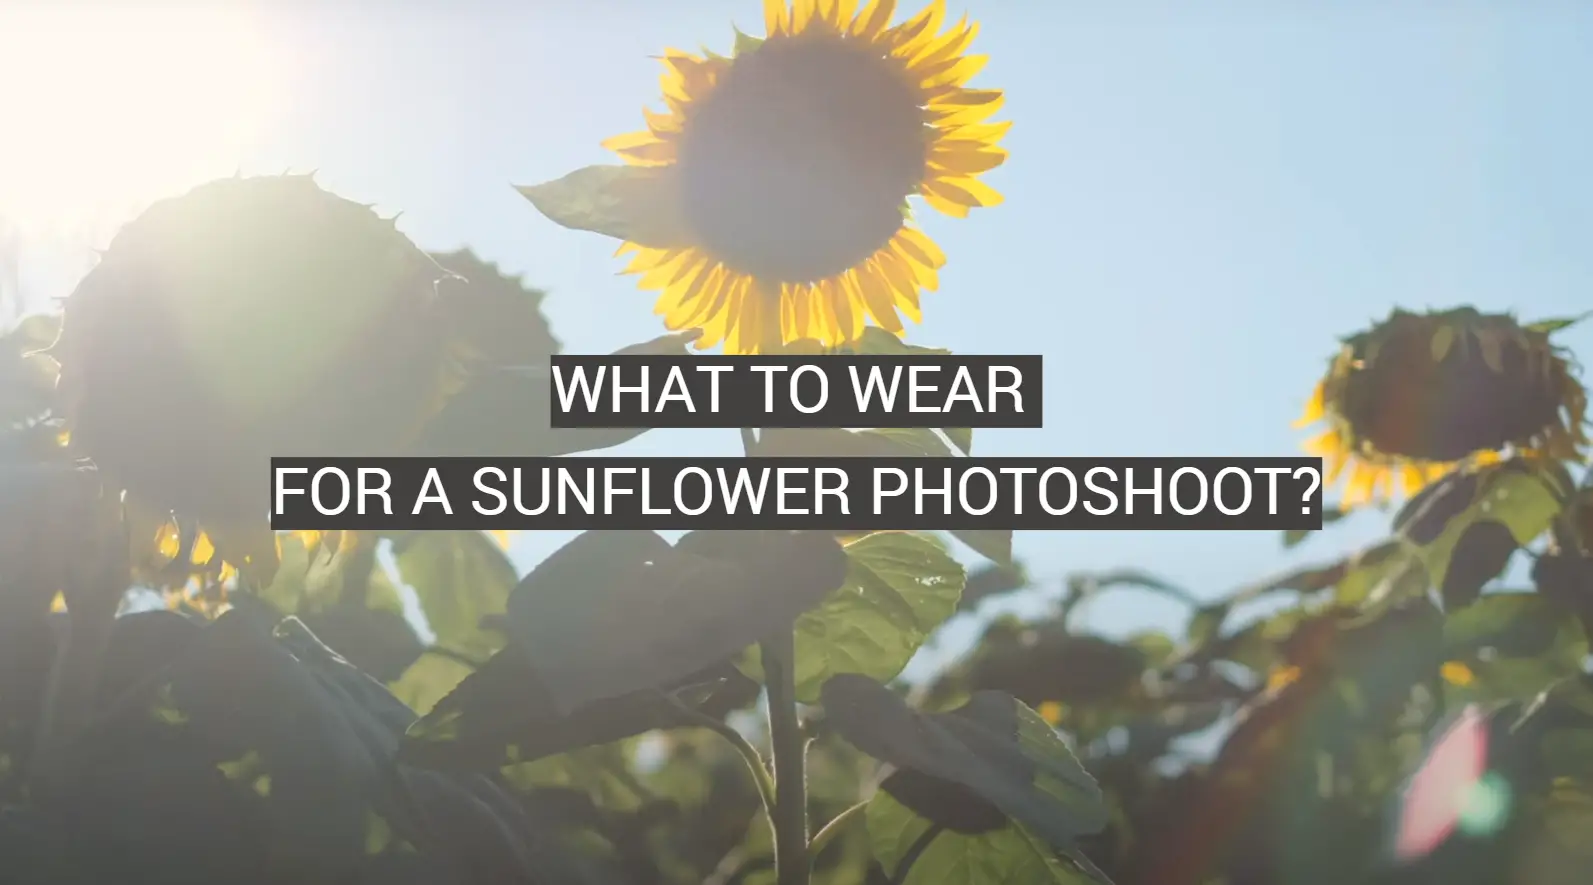 What to Wear for a Sunflower Photoshoot?